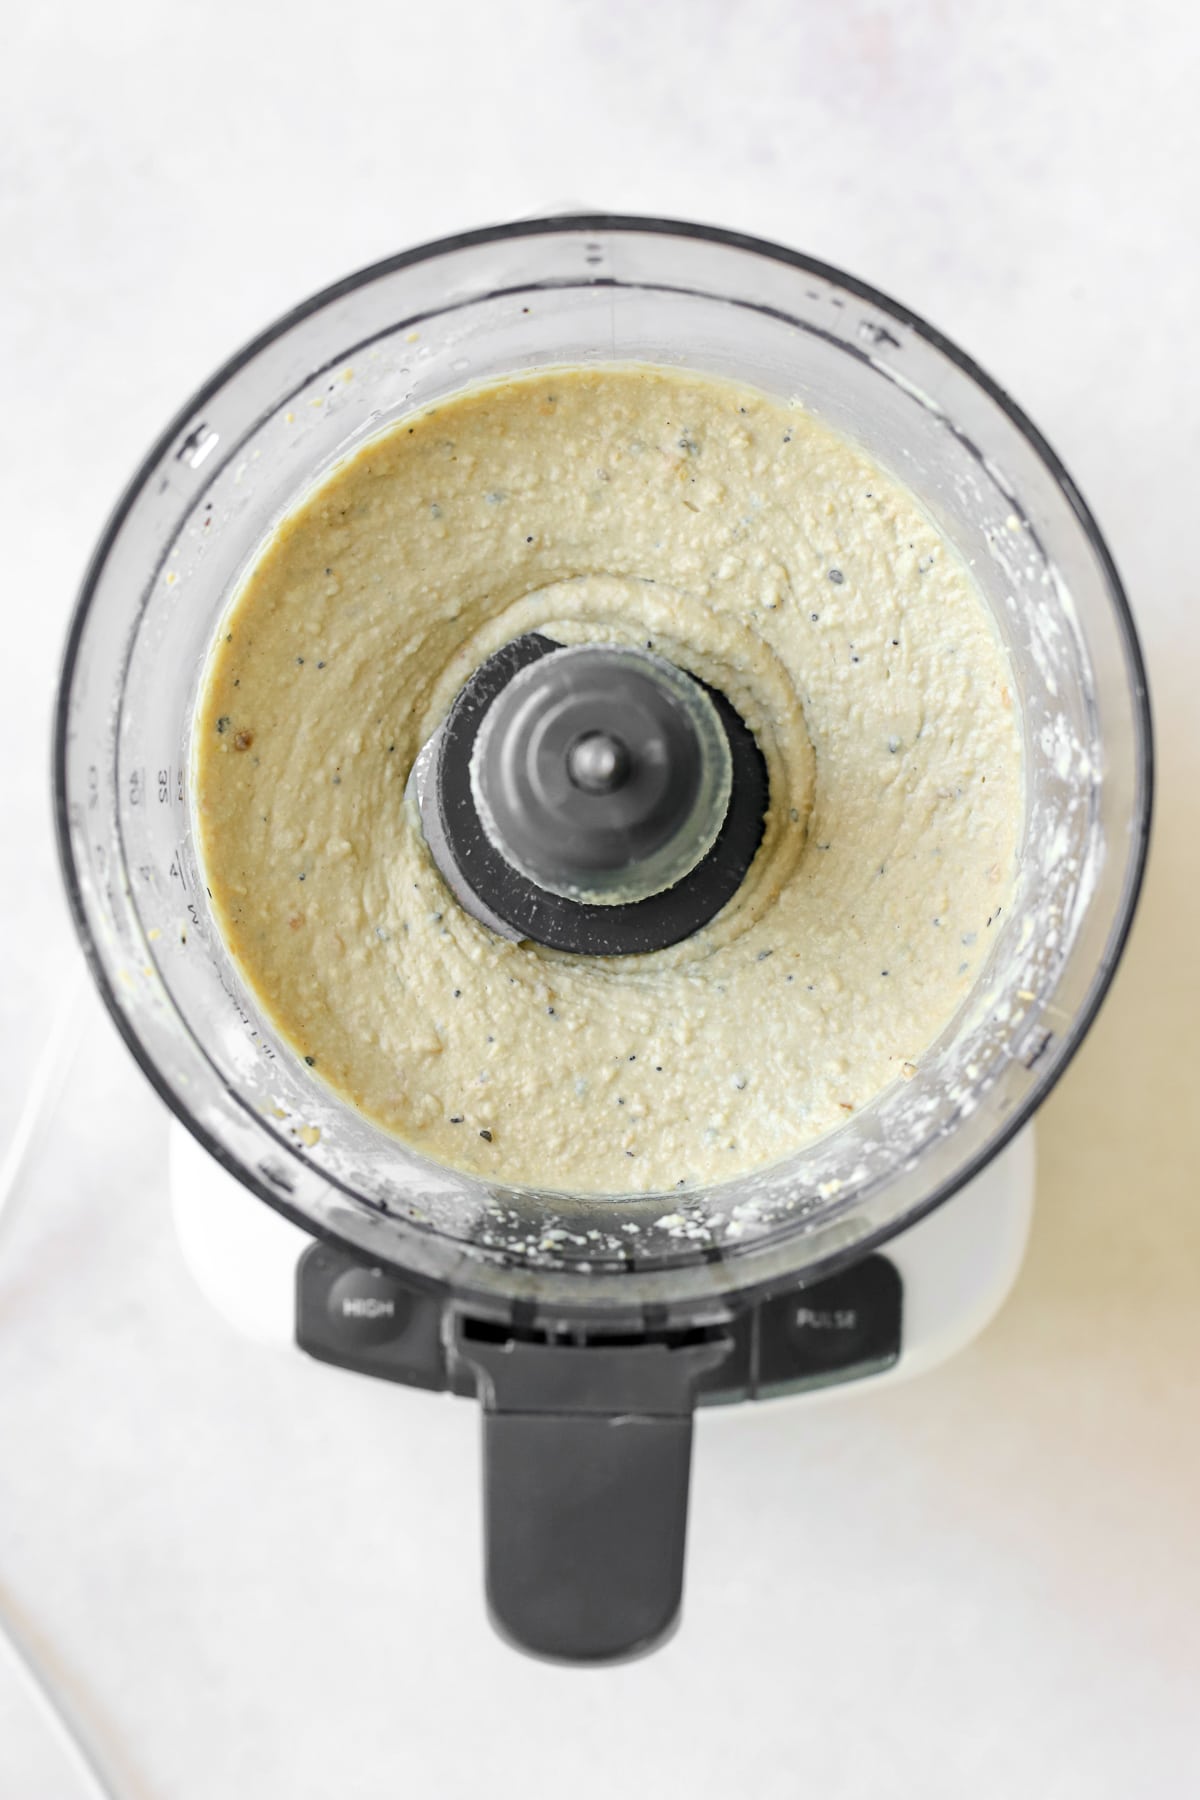 Hummus blended smoothly food processor.